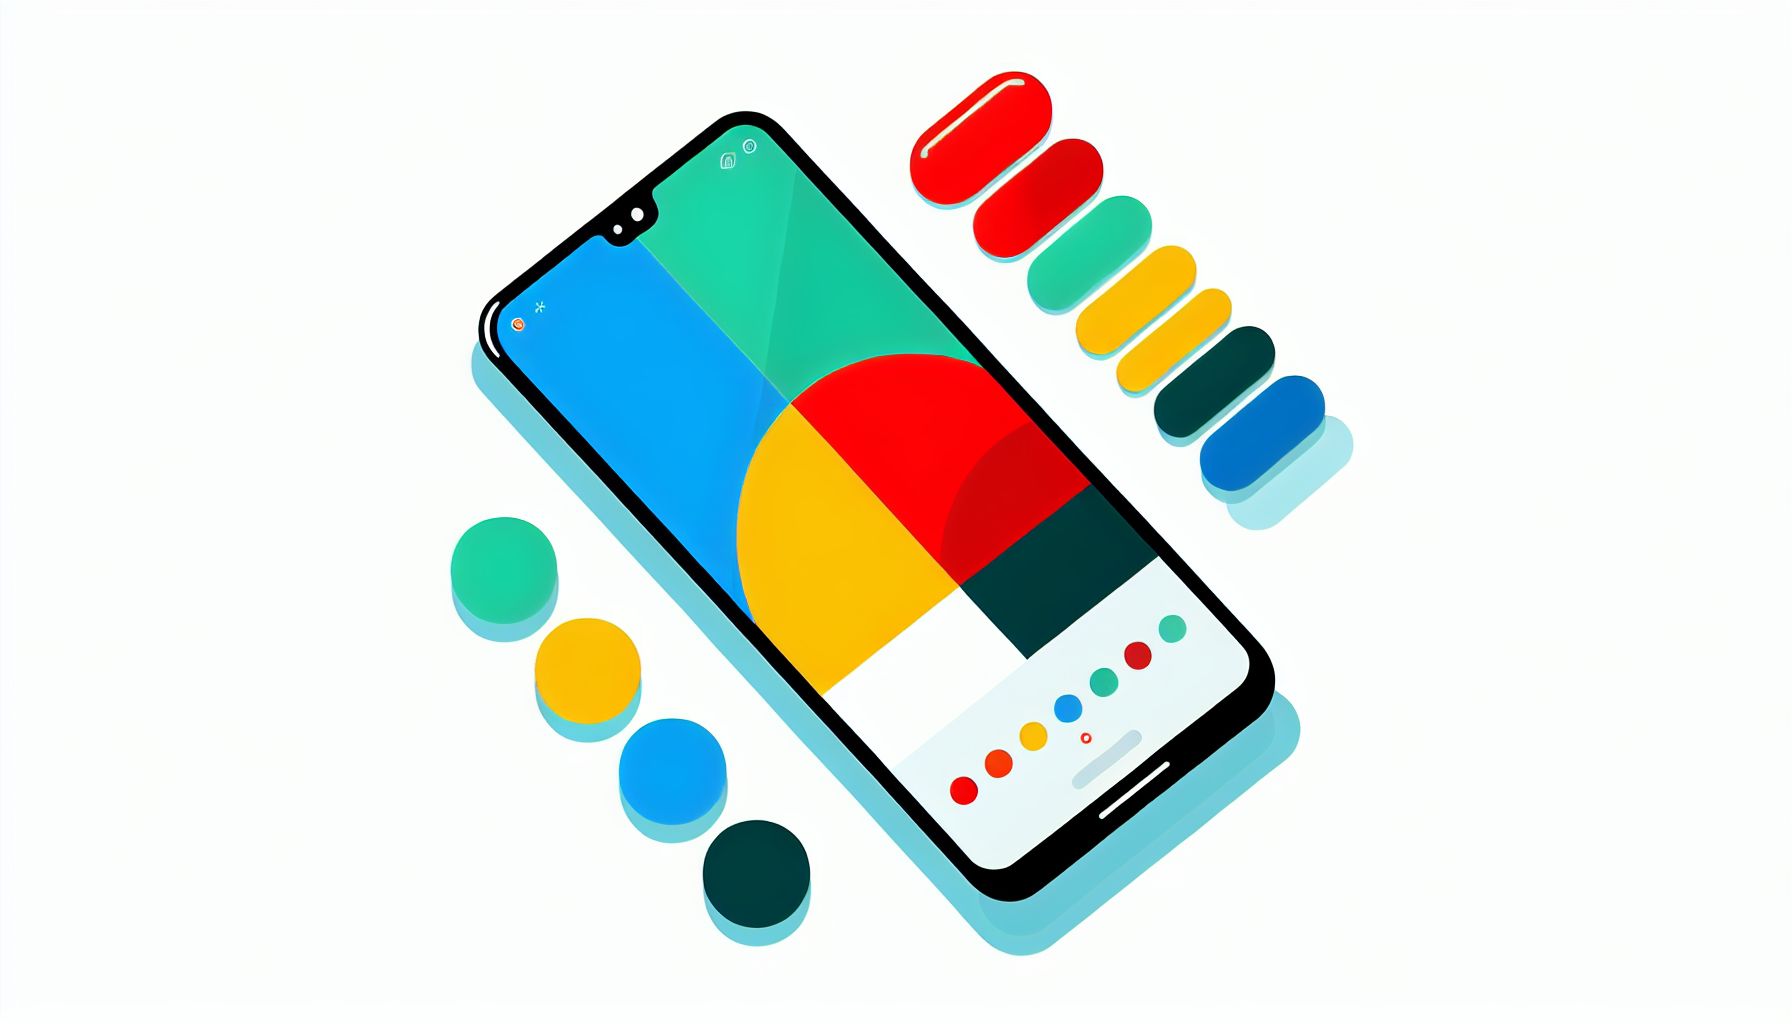 Smartphone in flat illustration style and white background, red #f47574, green #88c7a8, yellow #fcc44b, and blue #645bc8 colors.